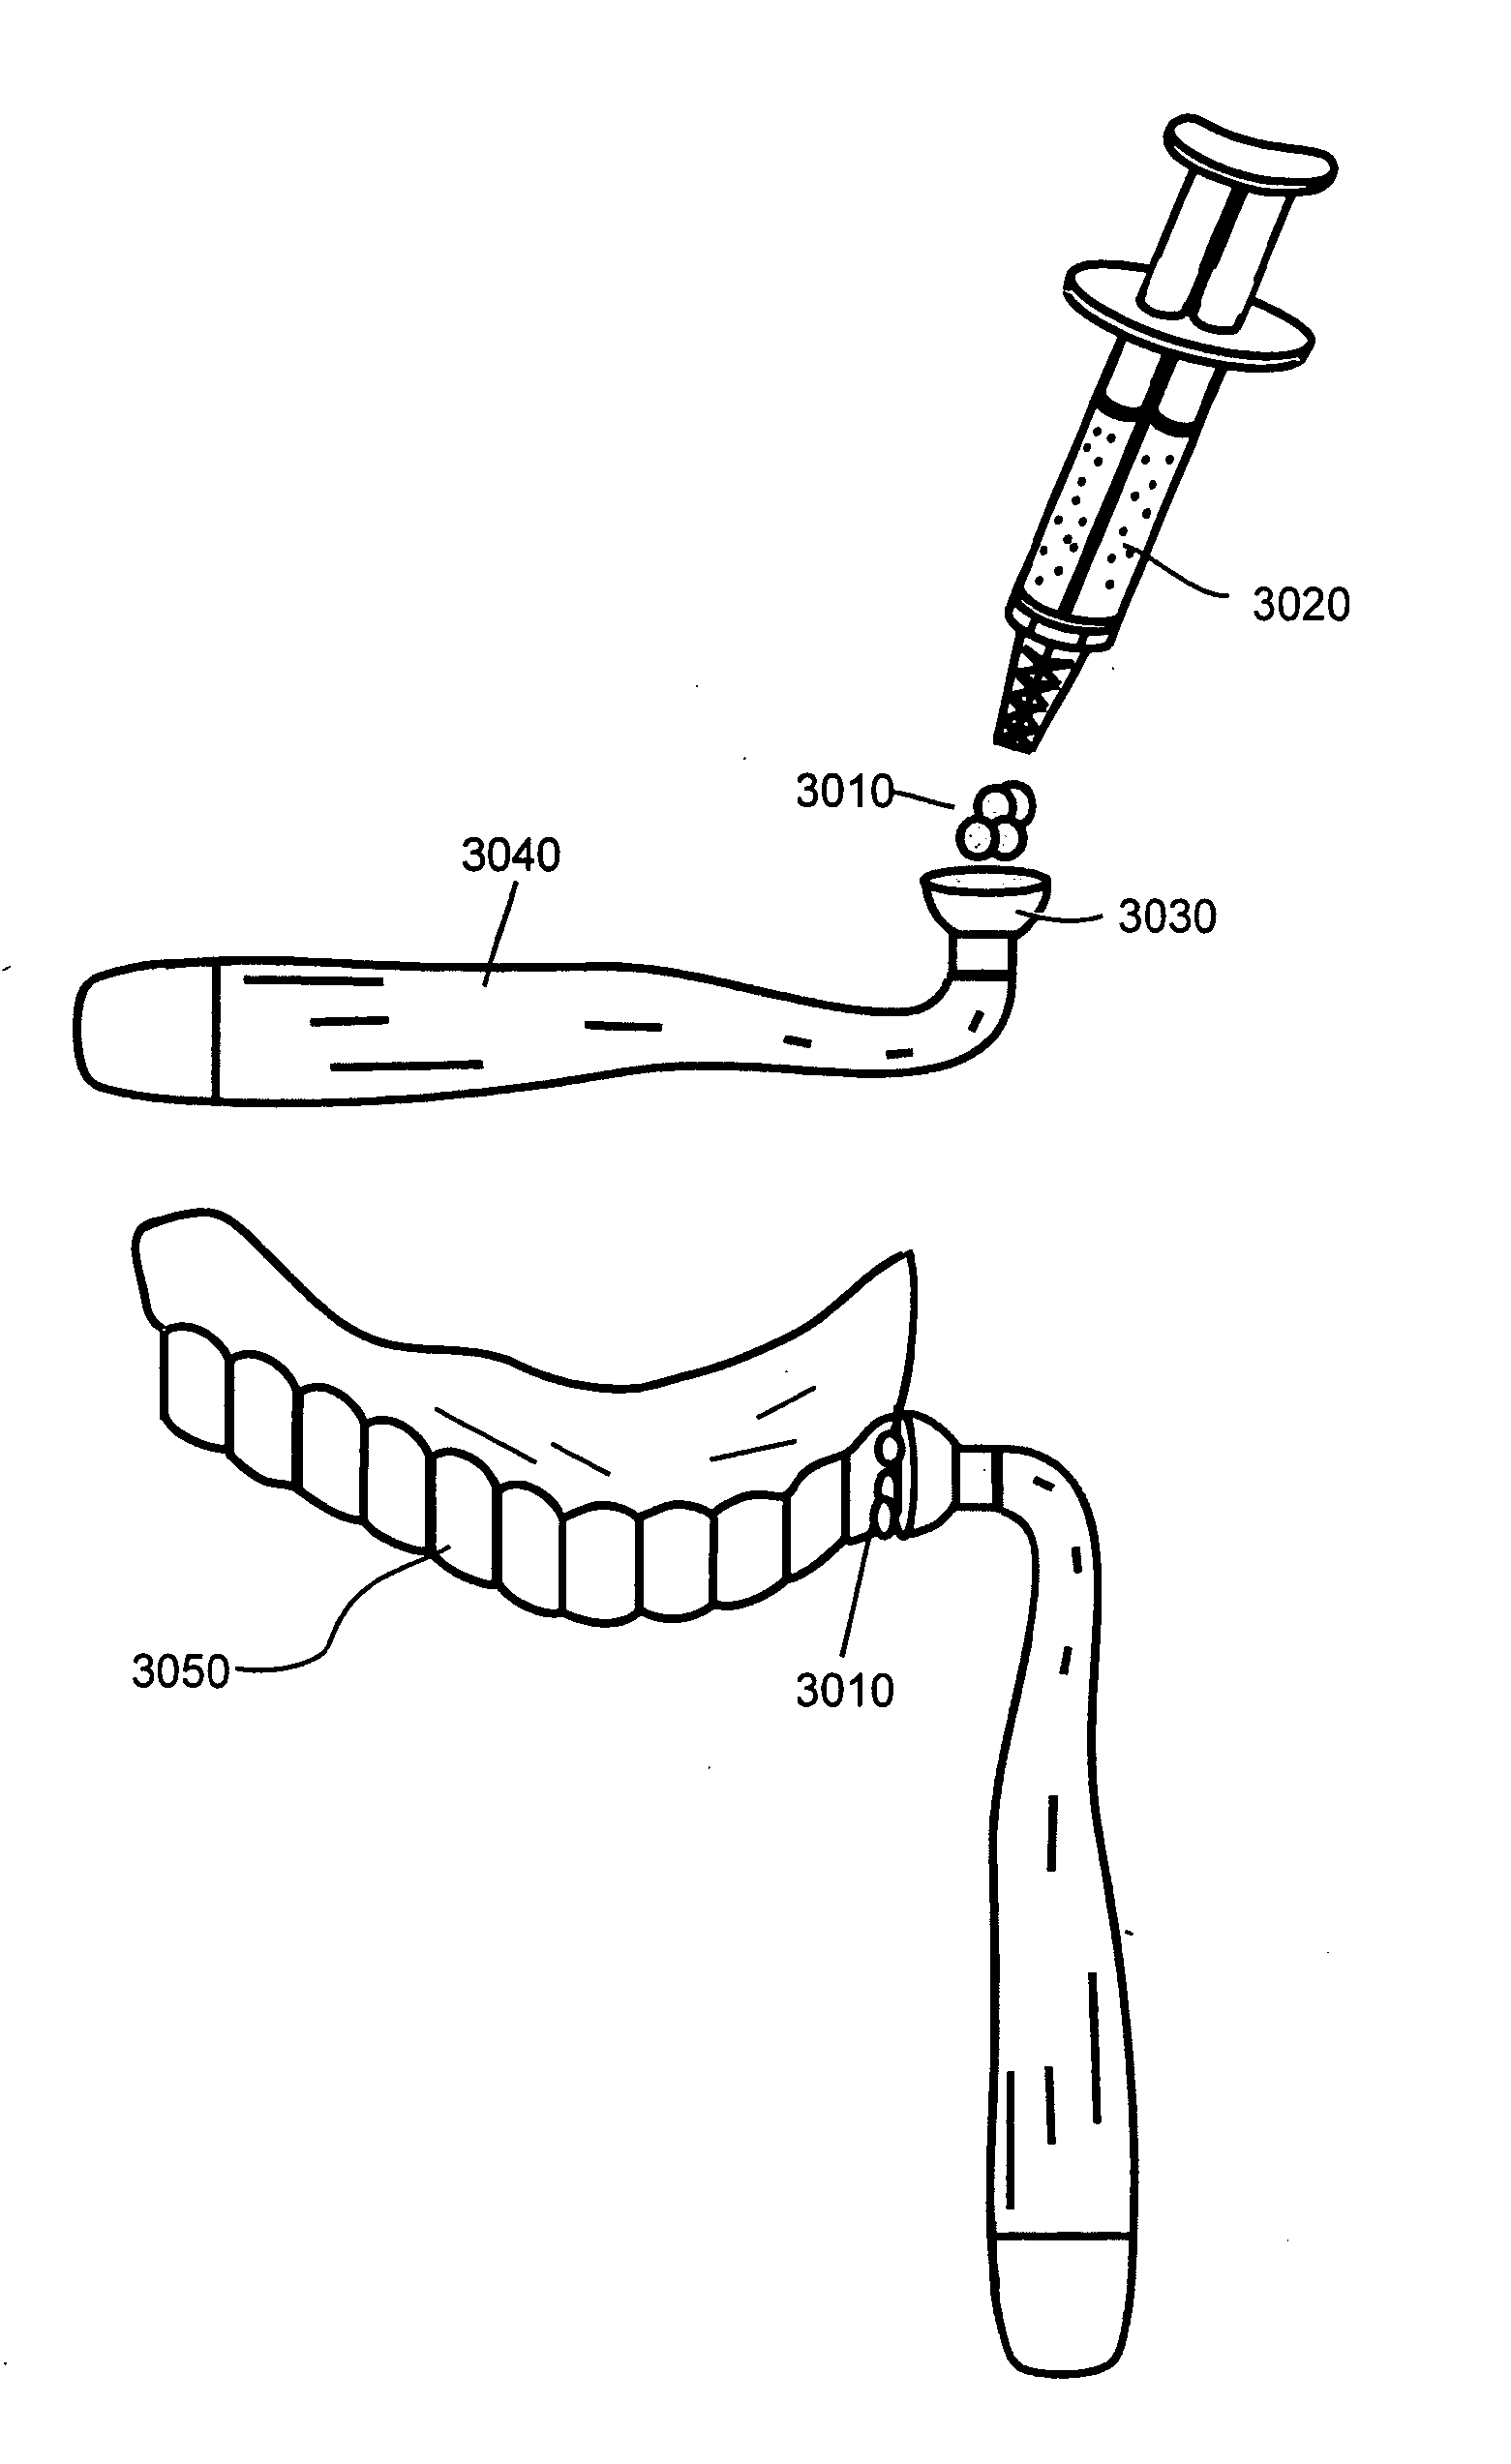 Bleaching Toothpastes and Methods for Making and Using Them